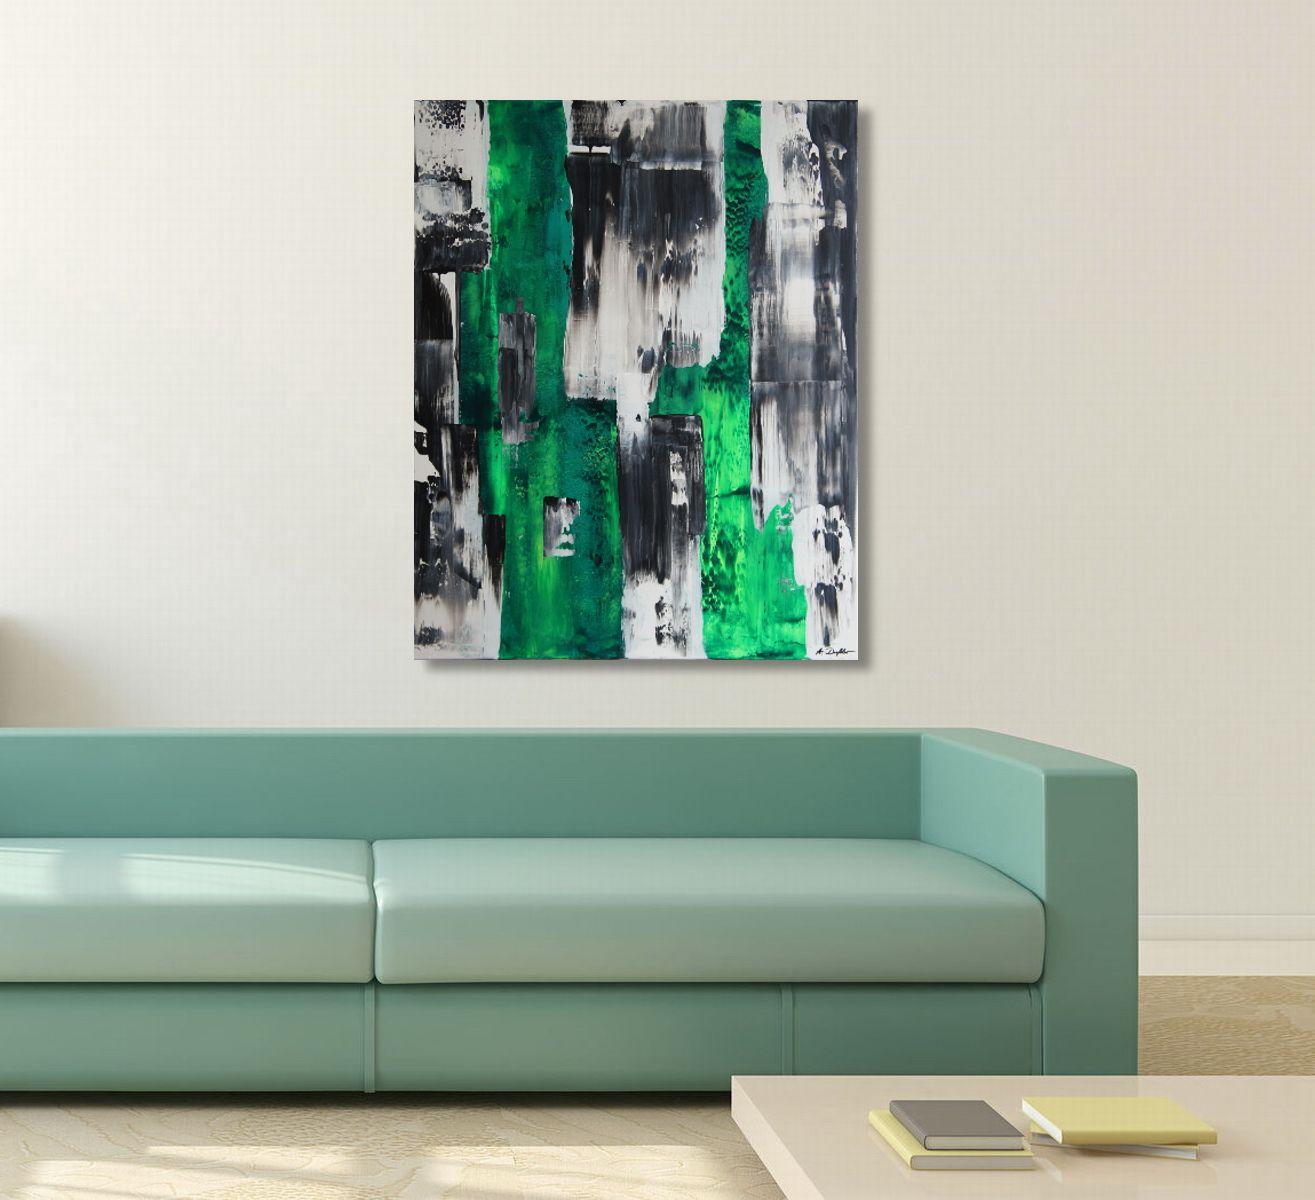 Bringing in some color into the otherwise black and white painting. This is the second of the two green core paintings. Enjoy!    Unique painting using high-quality acrylic colors on gesso-primed professional gallery canvas stretched over solid